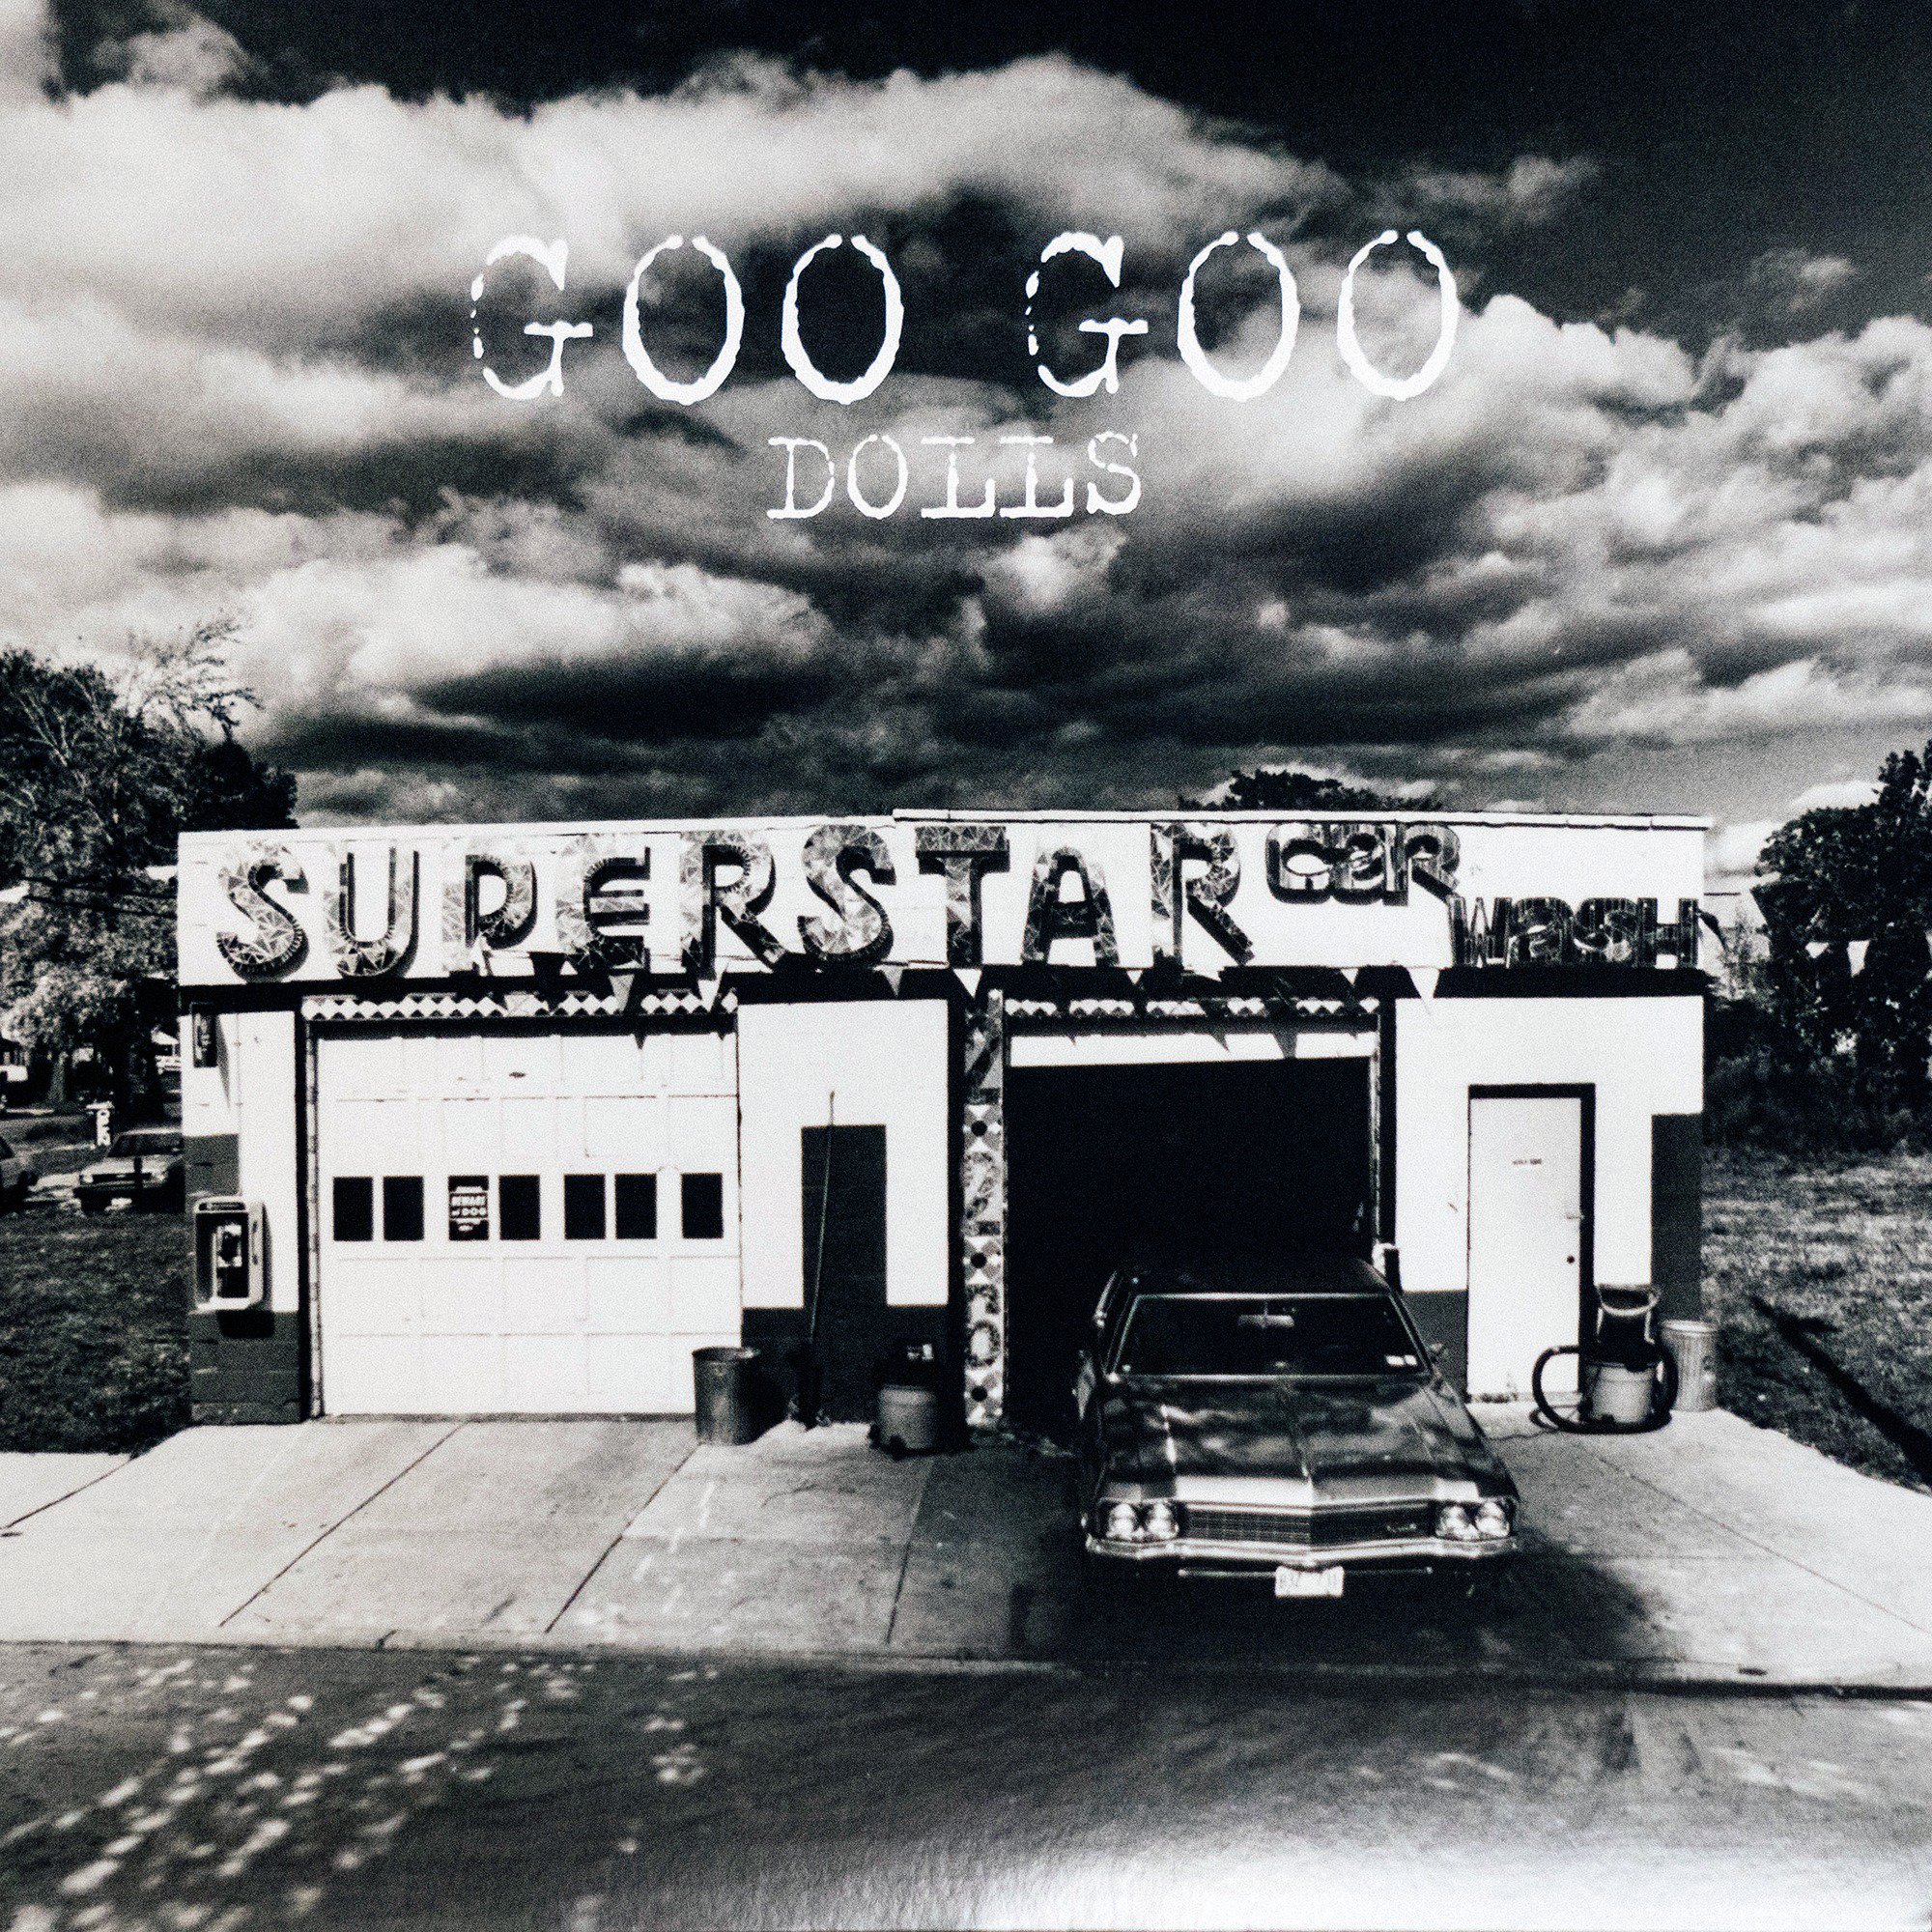 Goo Goo Dolls On Twitter Superstar Car Wash Was Released On This